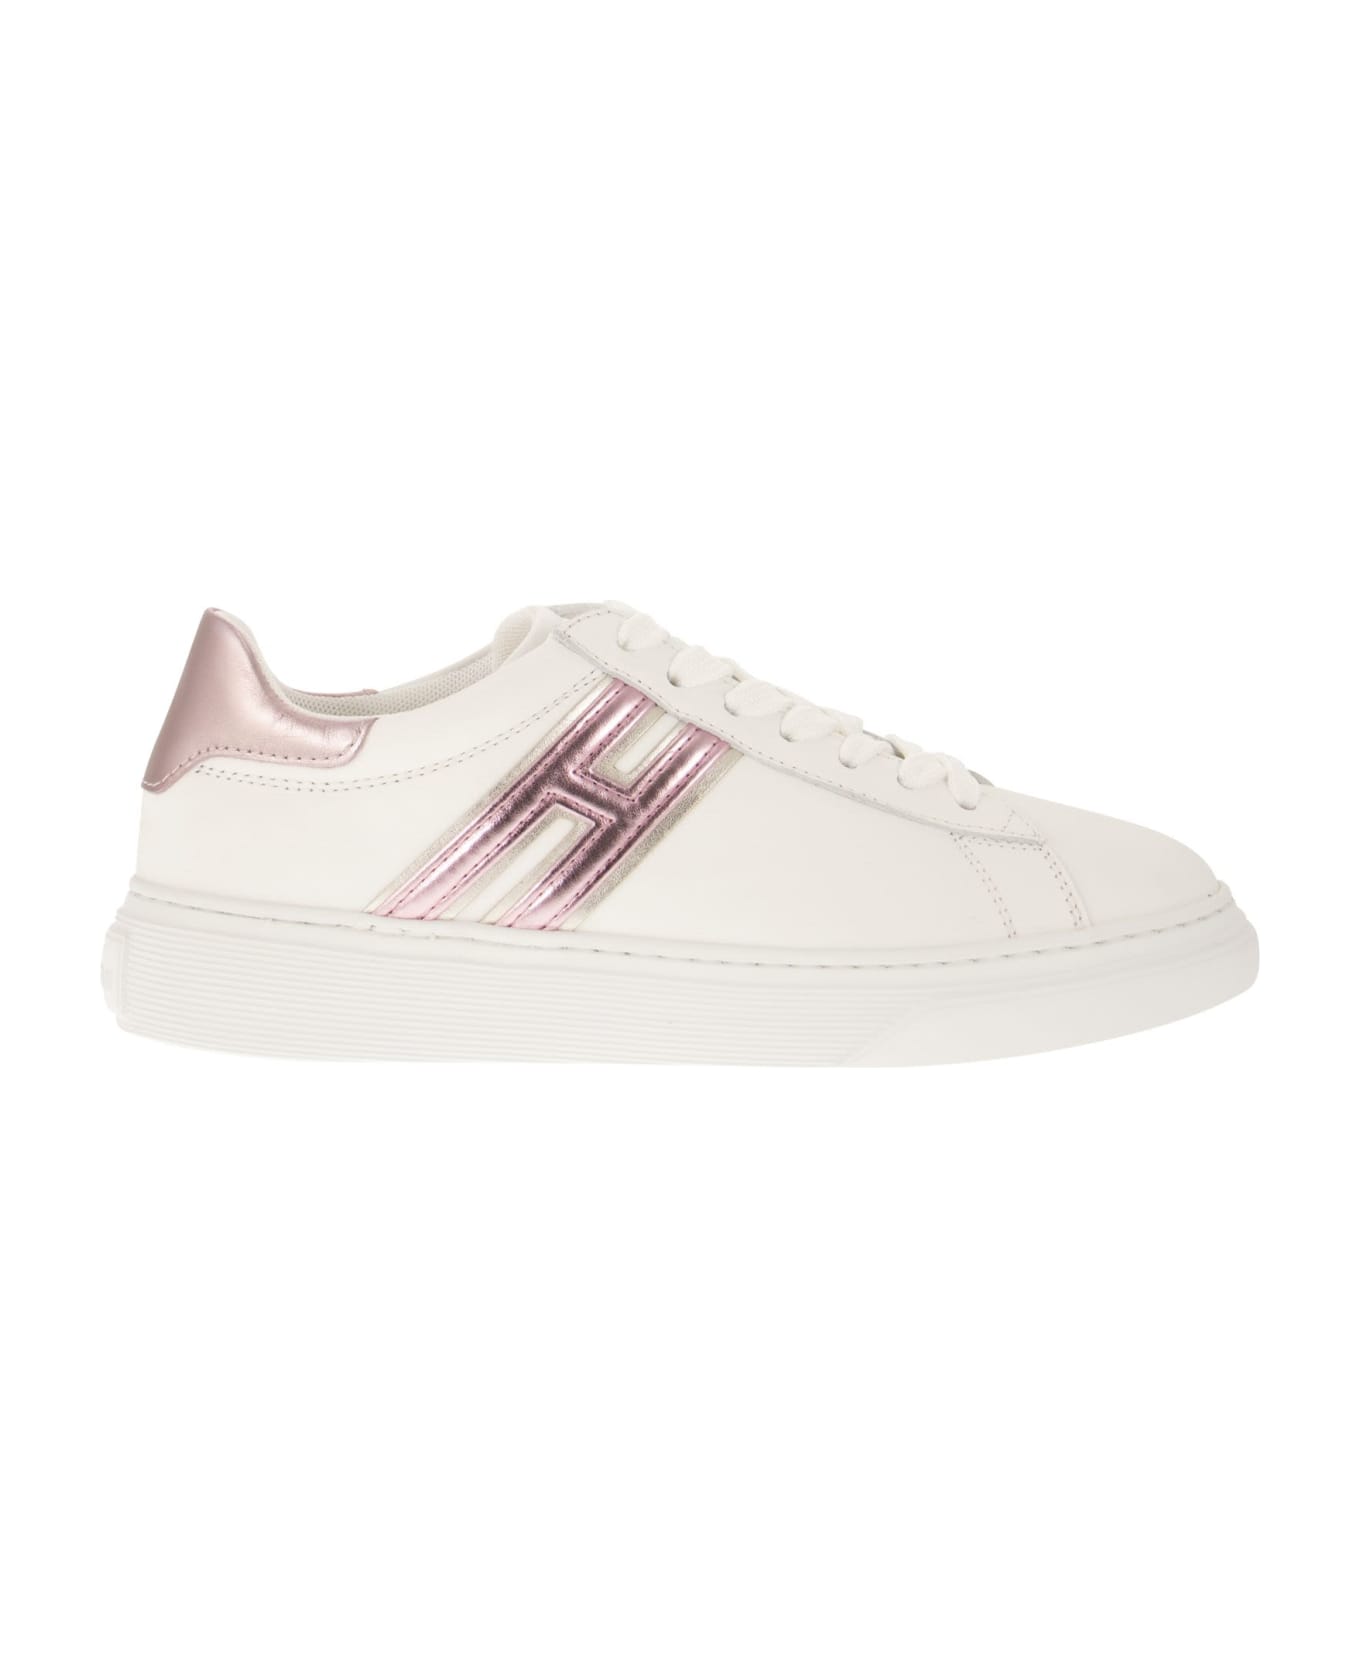 Hogan Sneakers "h365" In Leather - White/pink スニーカー